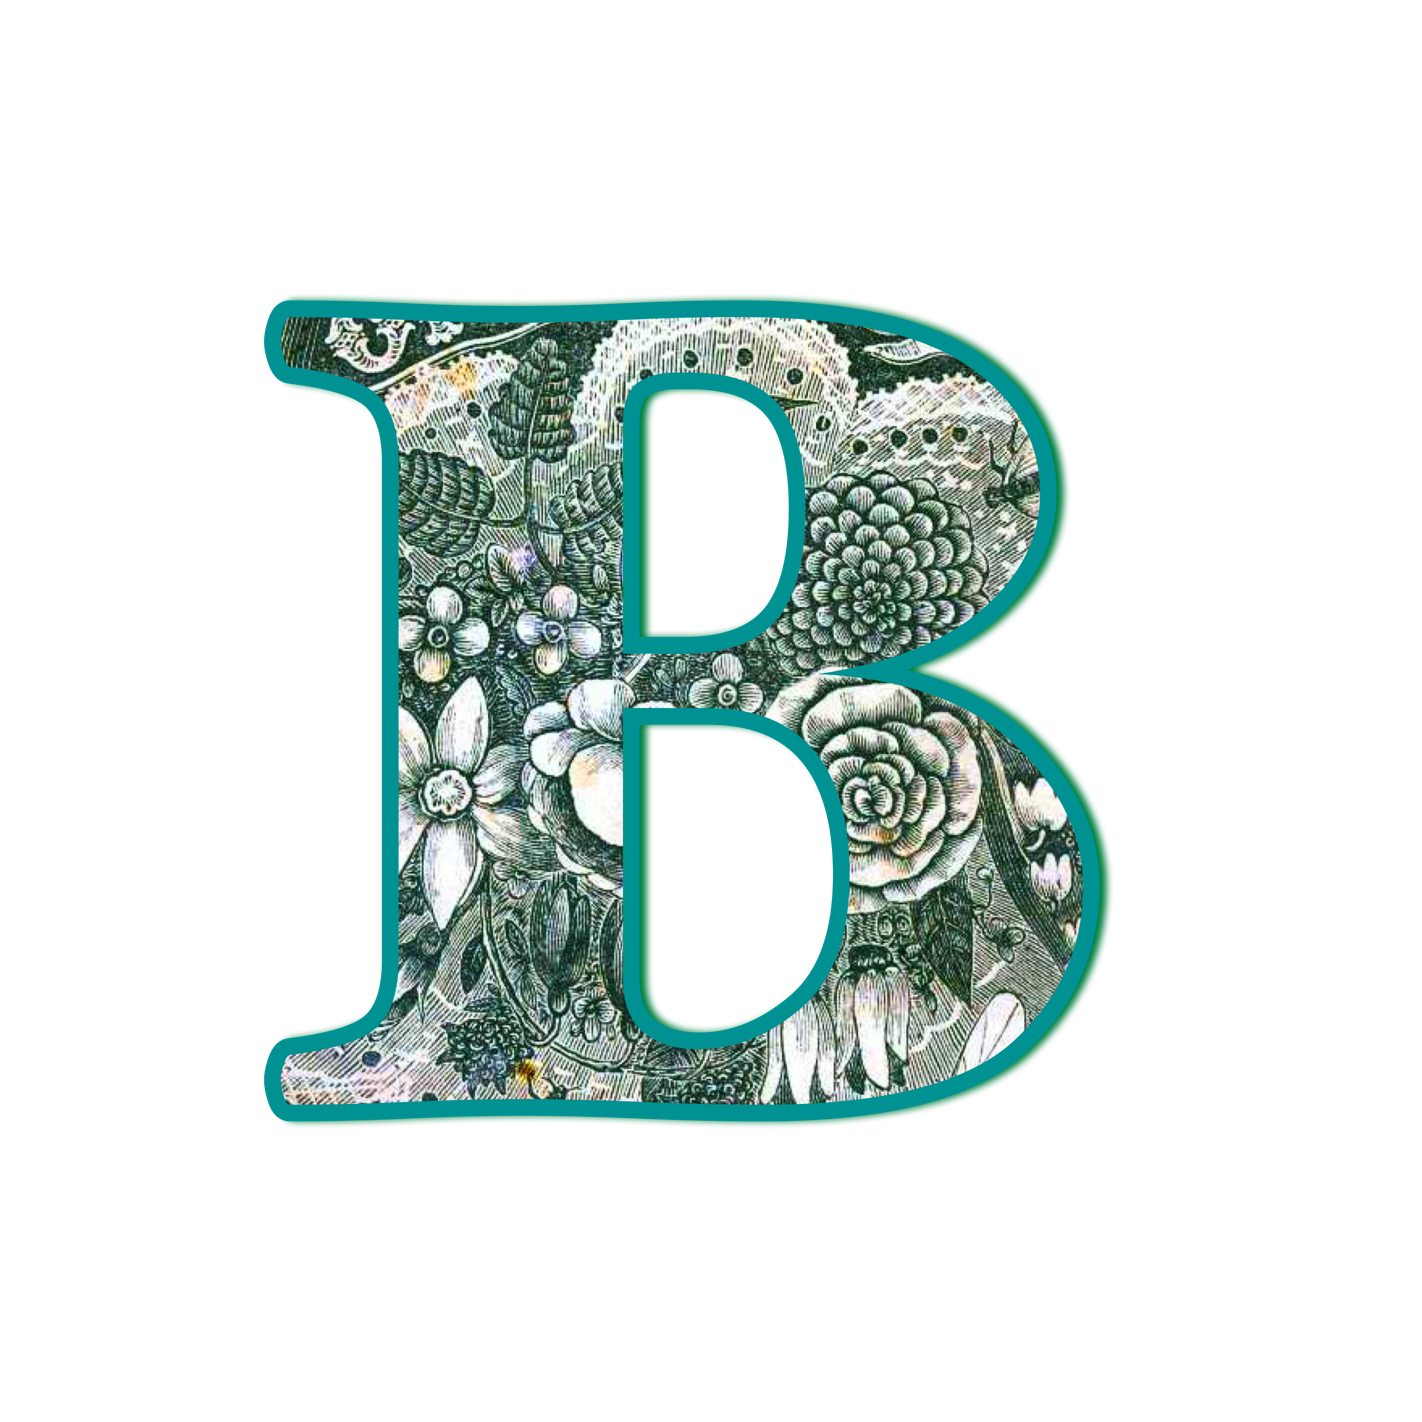 The letter B made from public domain, out-of-copyright "The Language of Flowers" cover by Nancy Hill for the Women's Legacy Project womenslegacyproject.com